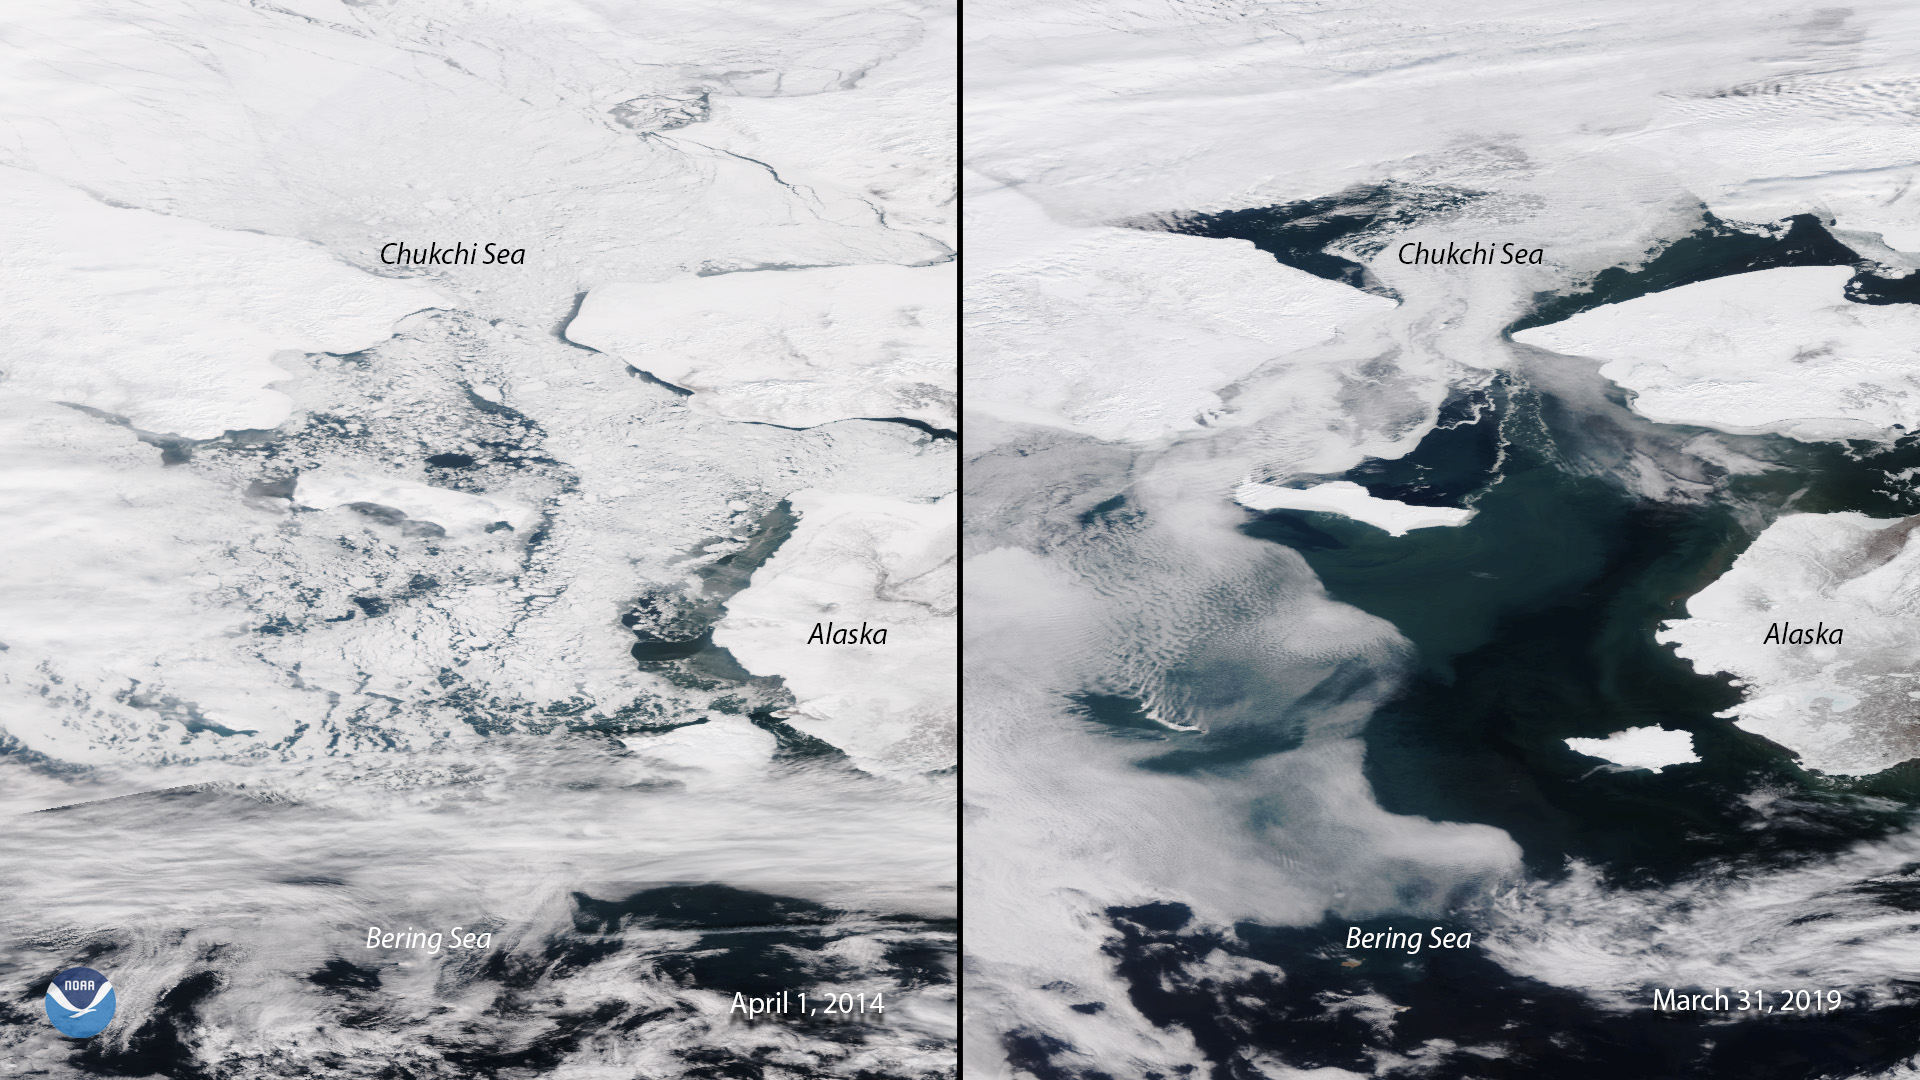 Bering Sea Appears Largely Ice-Free from NOAA-20